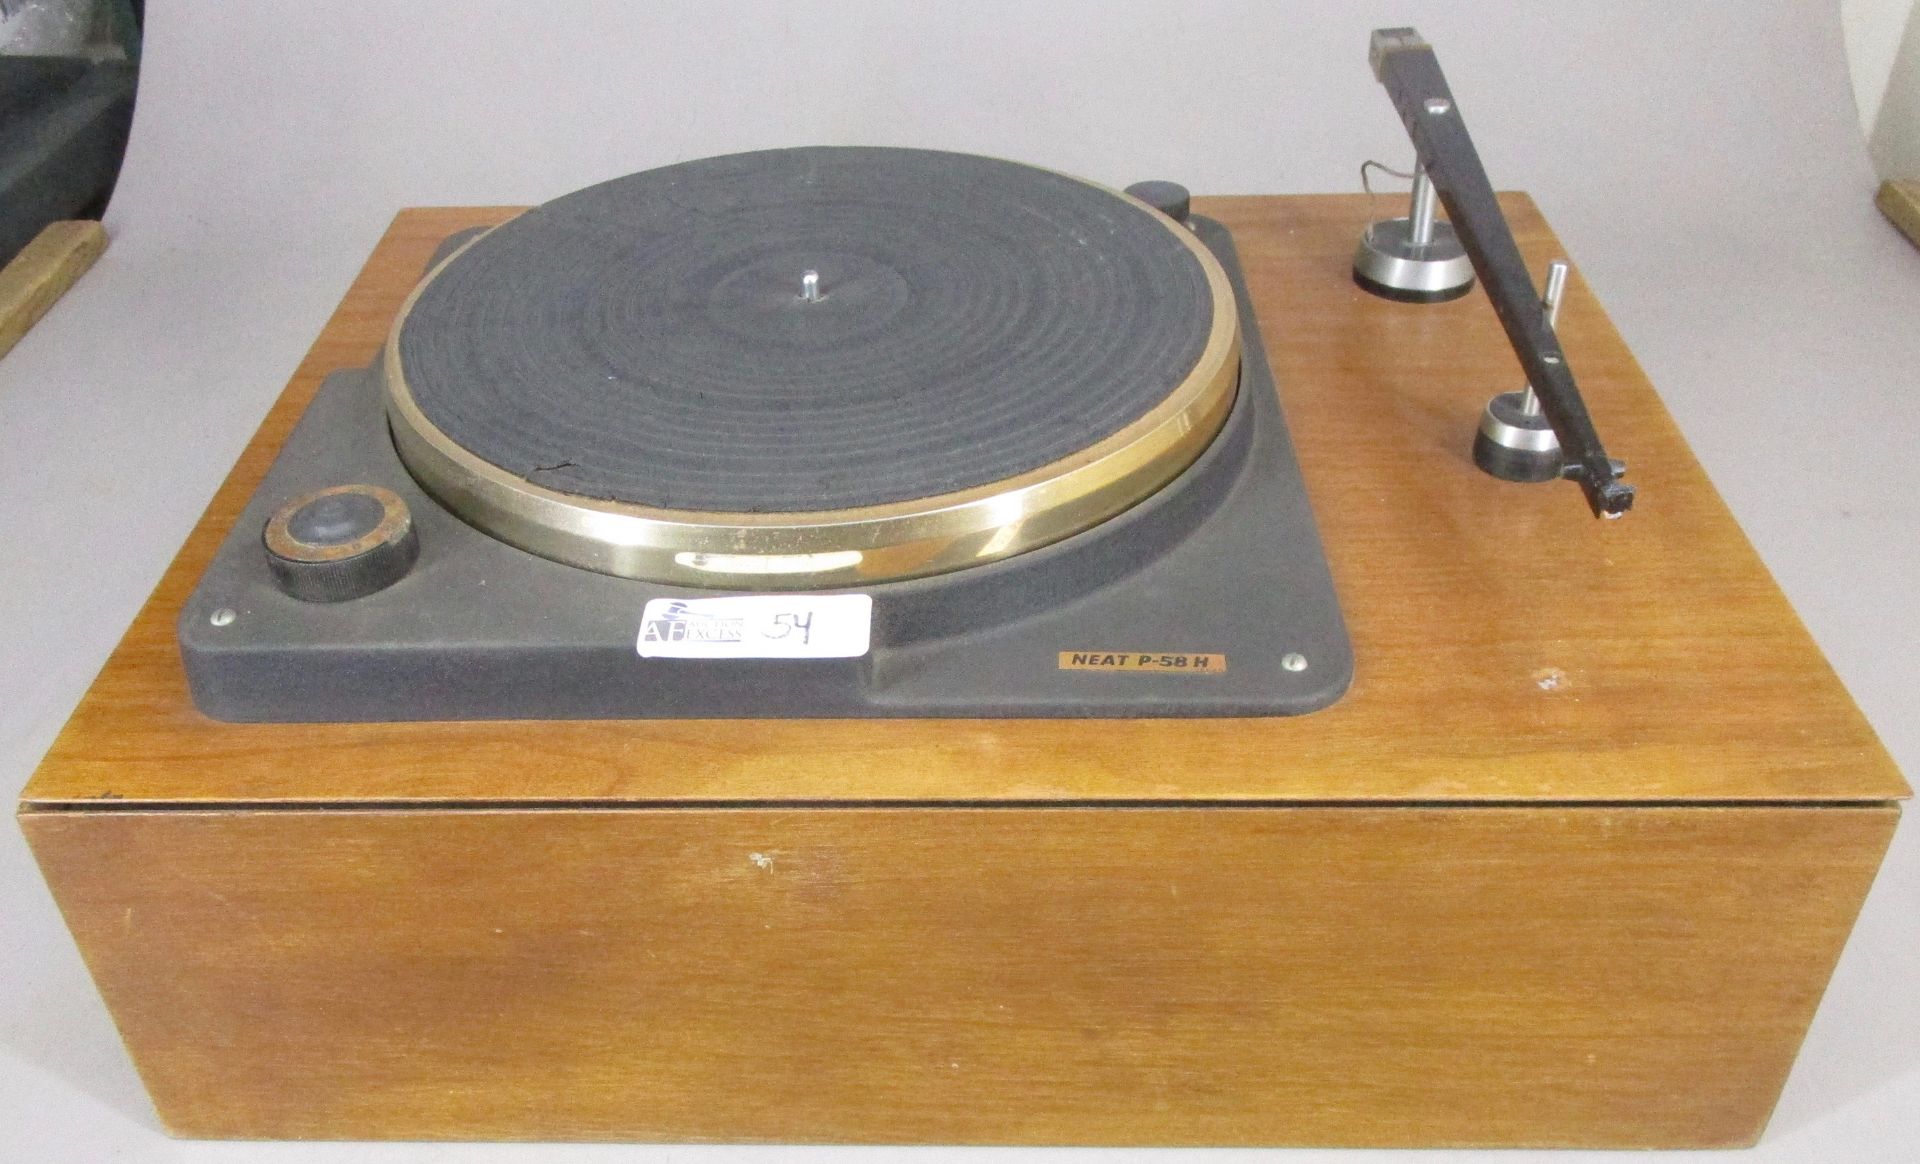 NEAT P-58 H TURNTABLE WITH SHURE TONEARM